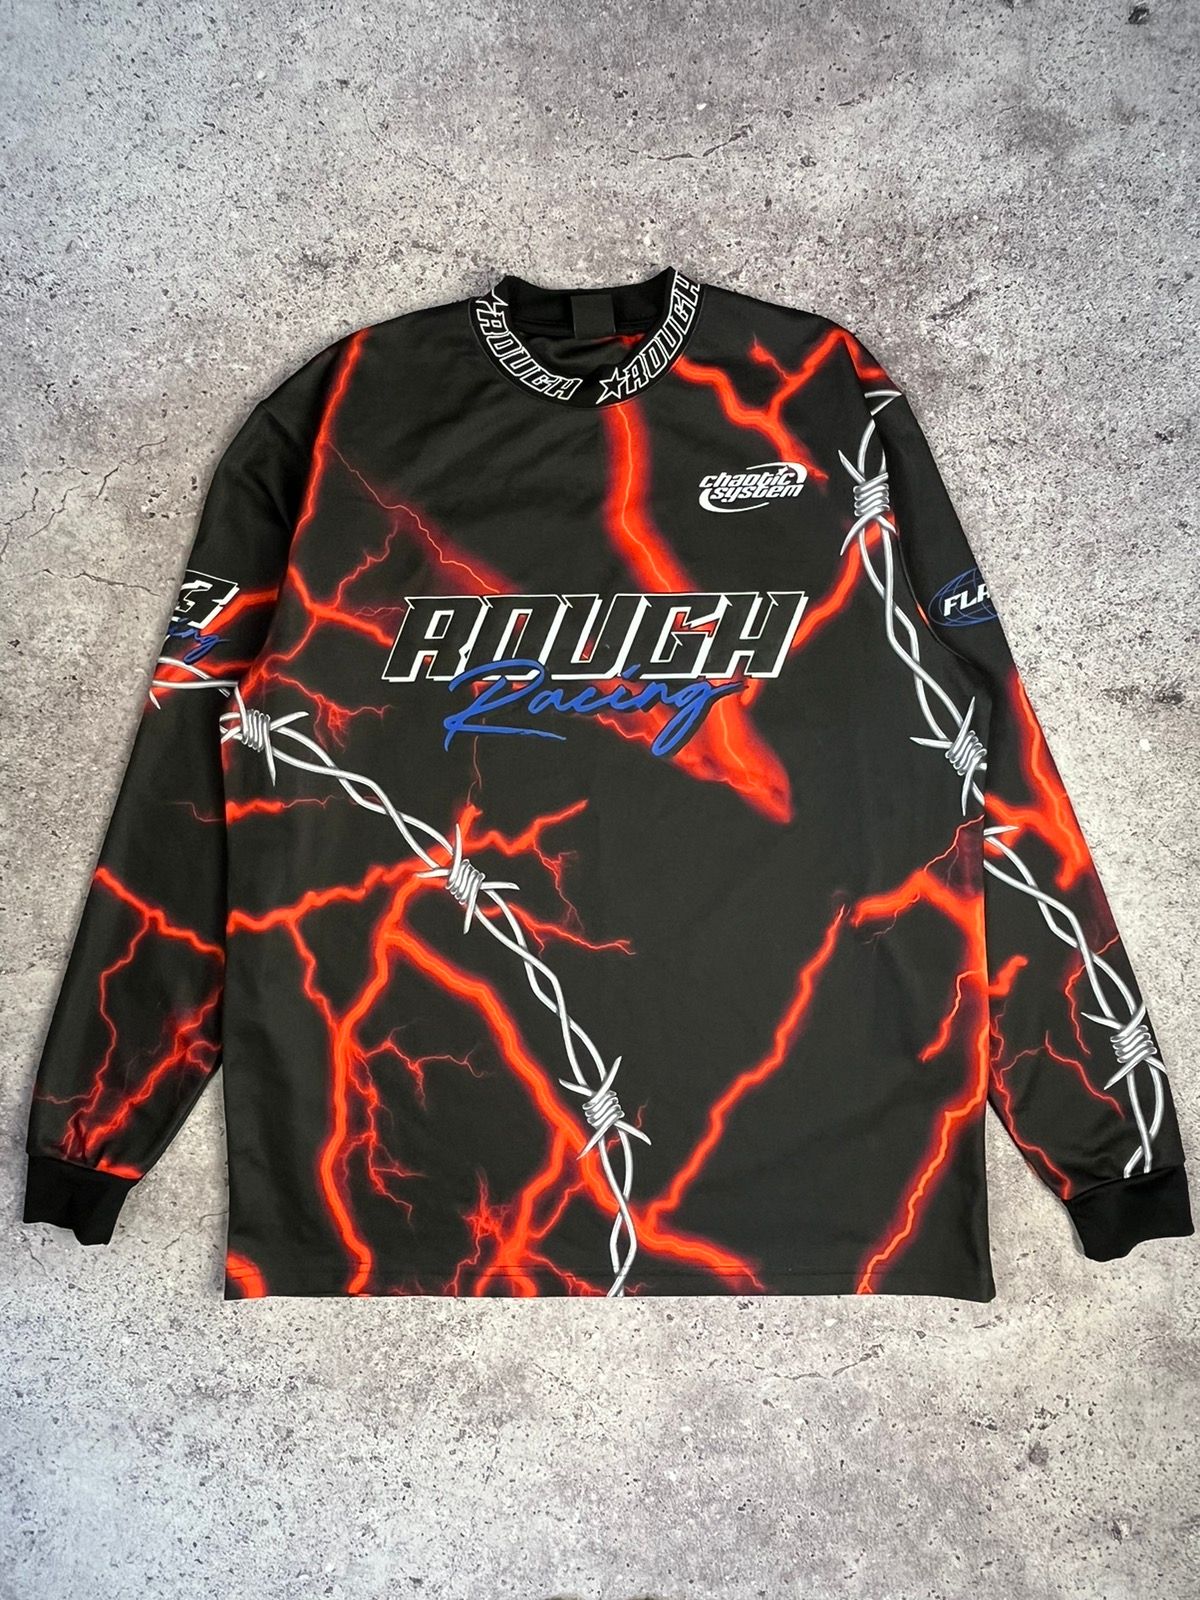 Pre-owned Racing Y2k Jersey Fsbn 13 Rouch Racking Chaotic System Flash In Black/red